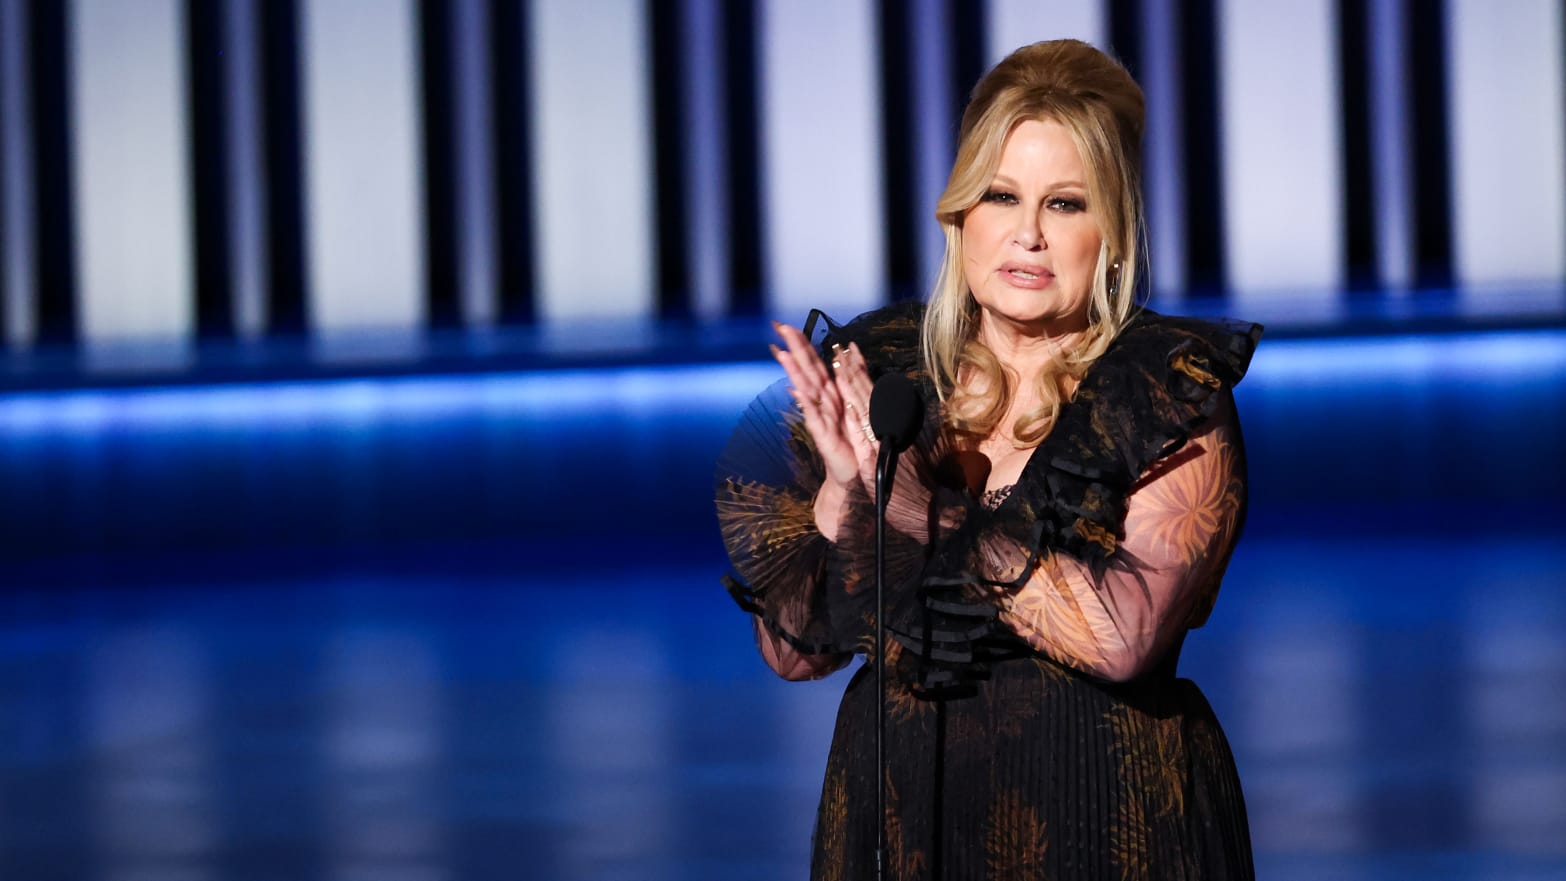 Jennifer Coolidge accepts the Outstanding Supporting Actress in a Drama Series award for “The White Lotus” at the Emmys